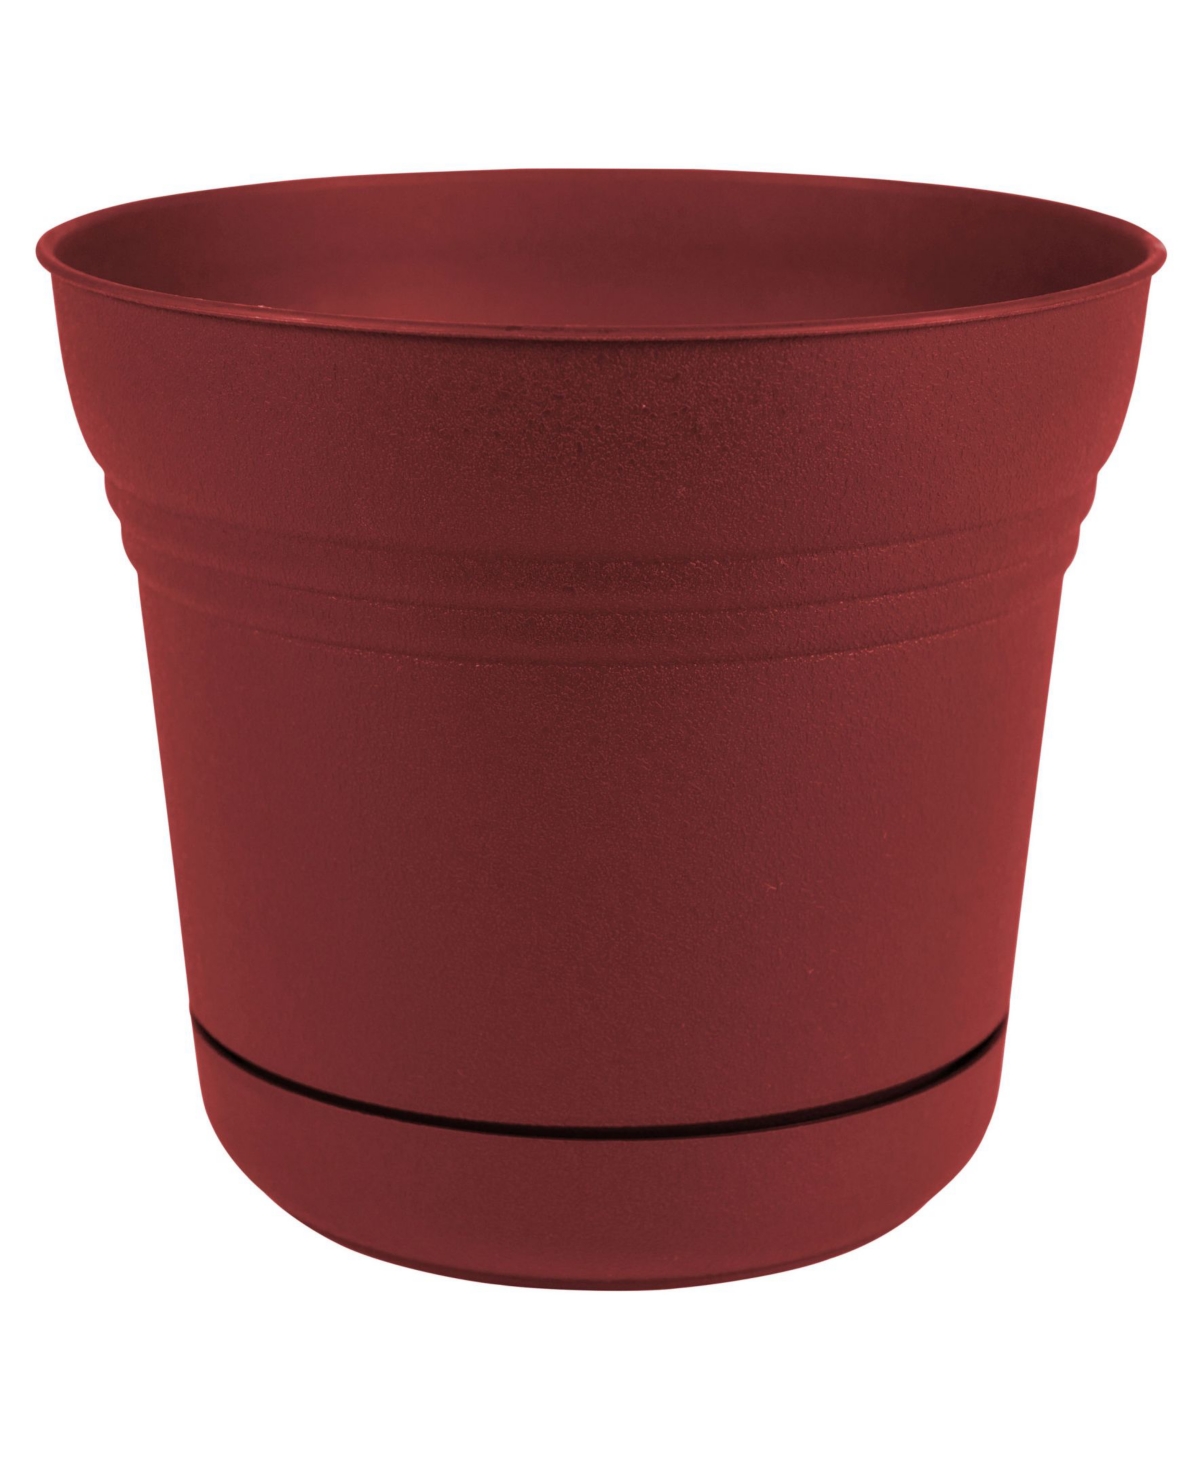 SP1413 Saturn Collection Planter w/ Saucer 14 inches Burnt Red - Red